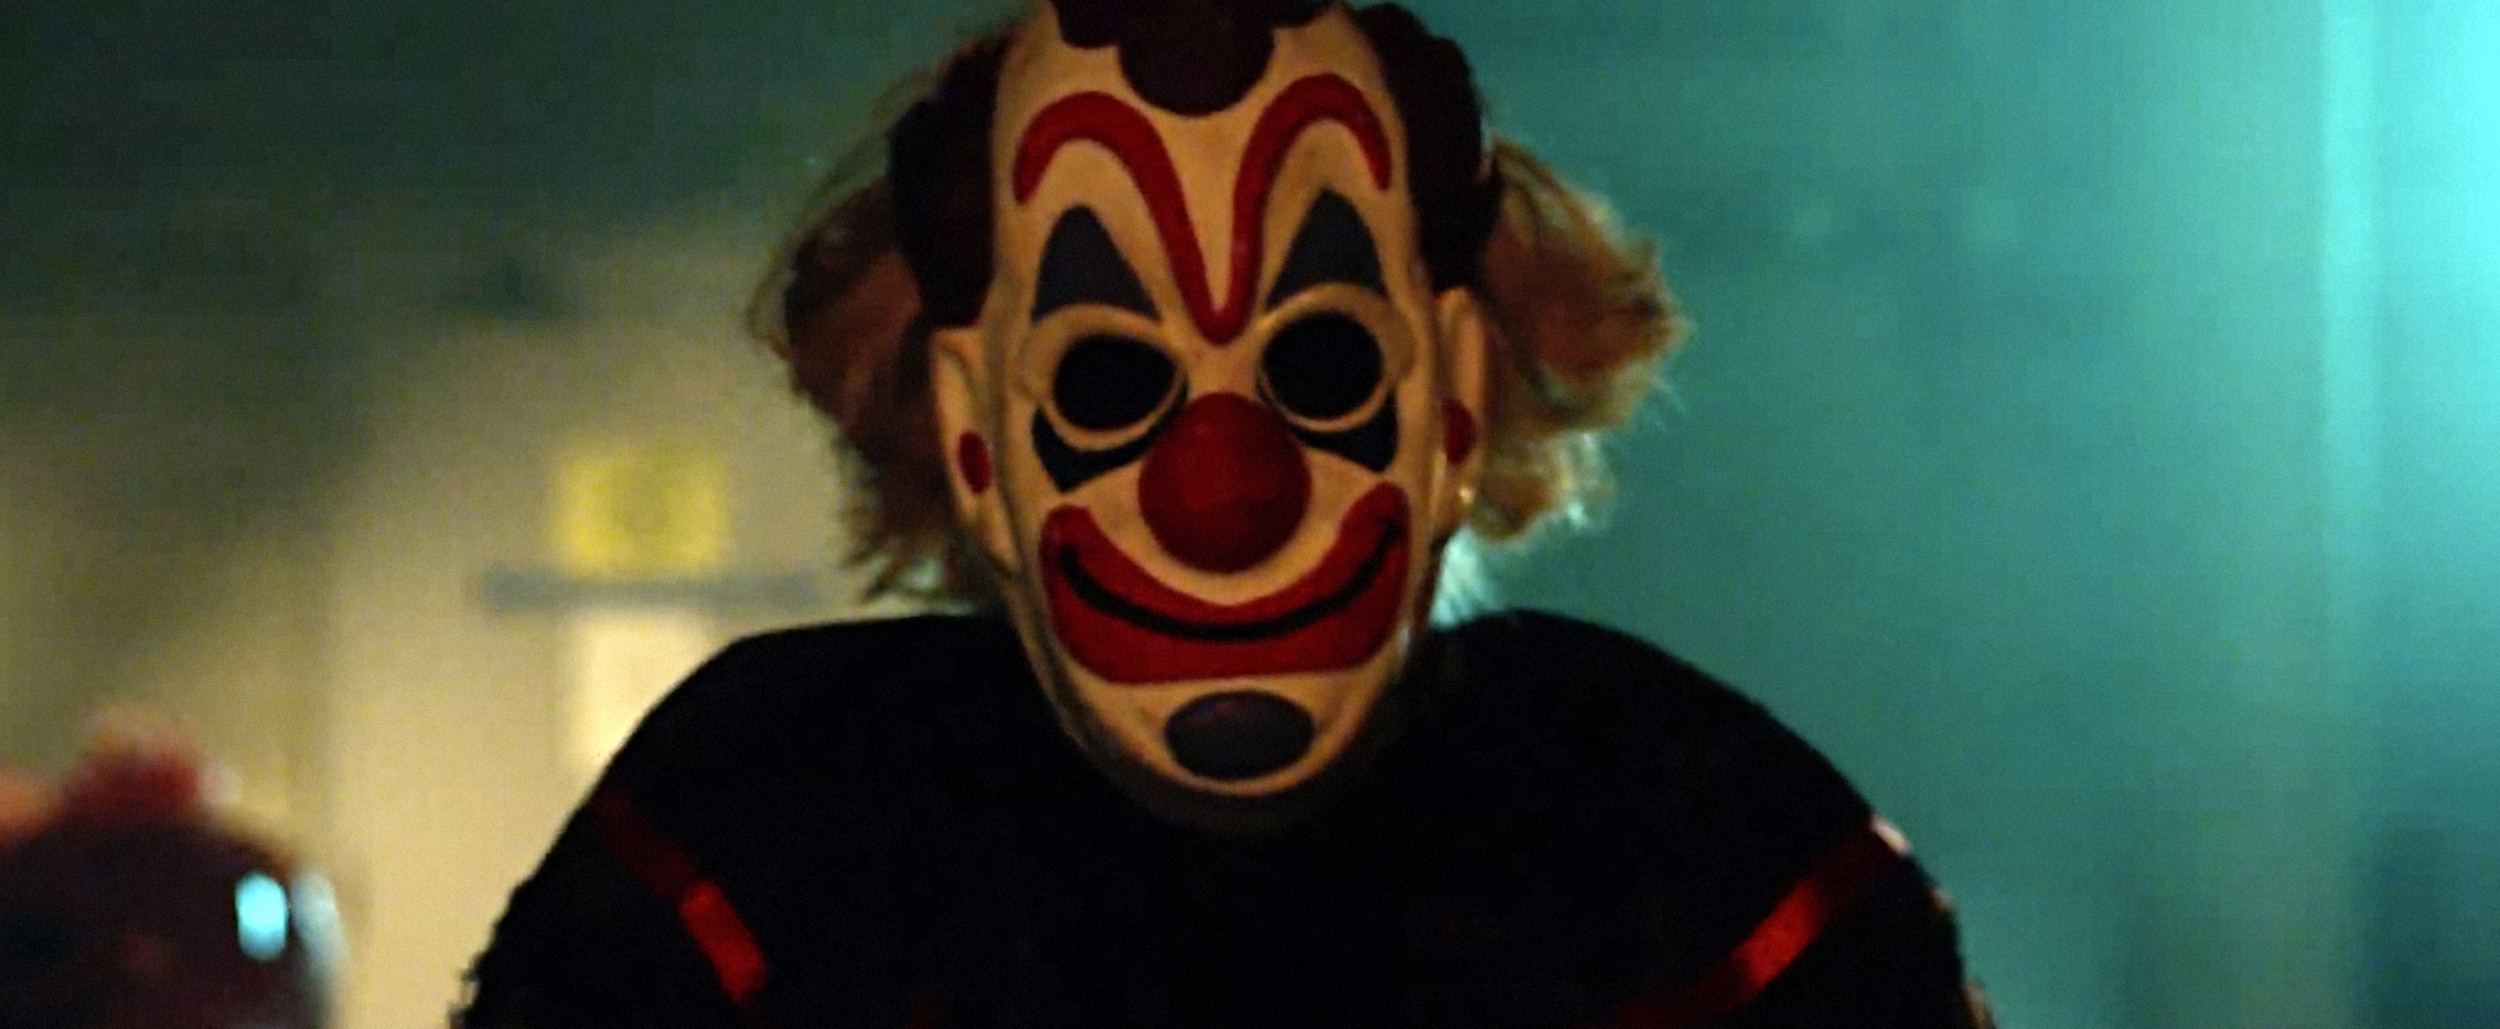 <p>At first, the clown in <em>Haunt</em> is just the creepy, silent figure in a mask who makes a group of teenage friends sign a waiver before entering a notoriously intense haunted house. But as the darkly suspenseful 2019 film (which was written and directed by Scott Beck and Bryan Woods) continues to make the audience guess which aspects of the extreme haunt are part of the experience and which are all too real, the clown emerges as a major player — right up until the brutal film’s satisfying final scene. </p><p><a href='https://www.msn.com/en-us/community/channel/vid-cj9pqbr0vn9in2b6ddcd8sfgpfq6x6utp44fssrv6mc2gtybw0us'>Did you enjoy this slideshow? Follow us on MSN to see more of our exclusive entertainment content.</a></p>